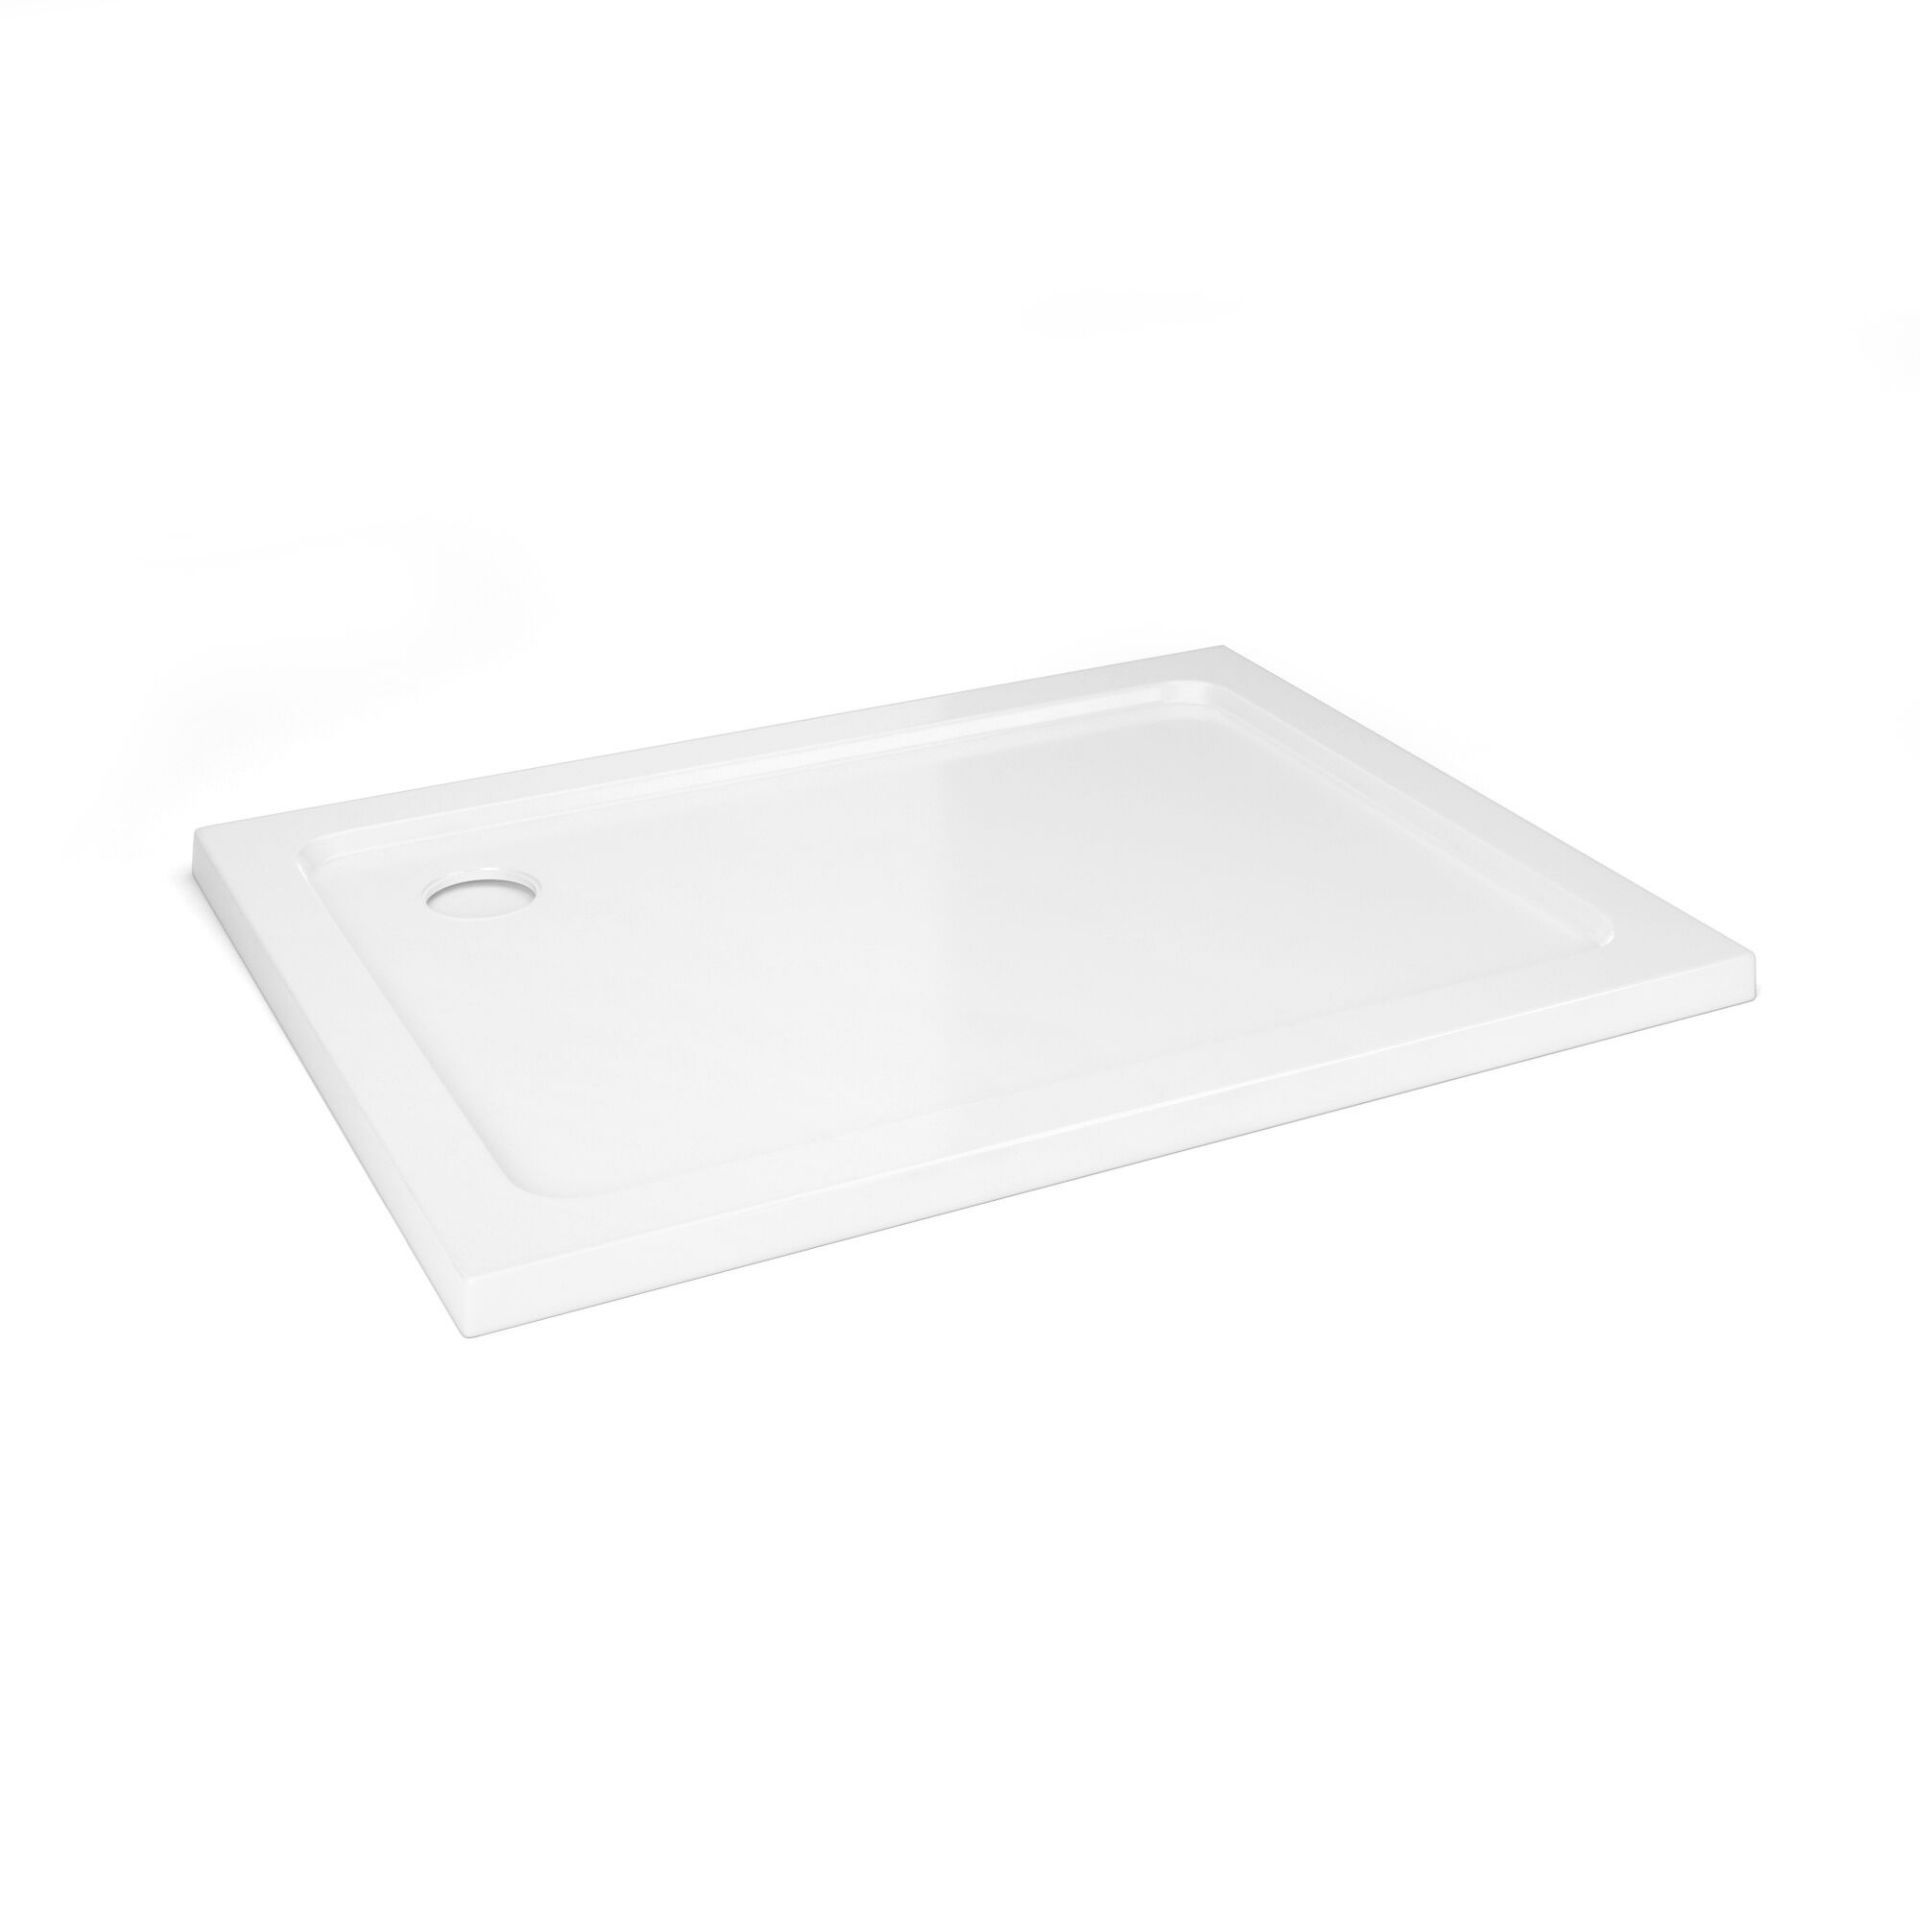 NEW 1000x800mm Rectangular Stone Shower Tray - Ultra Slim.RRP £299.99.Low profile ultra slim d... - Image 2 of 3